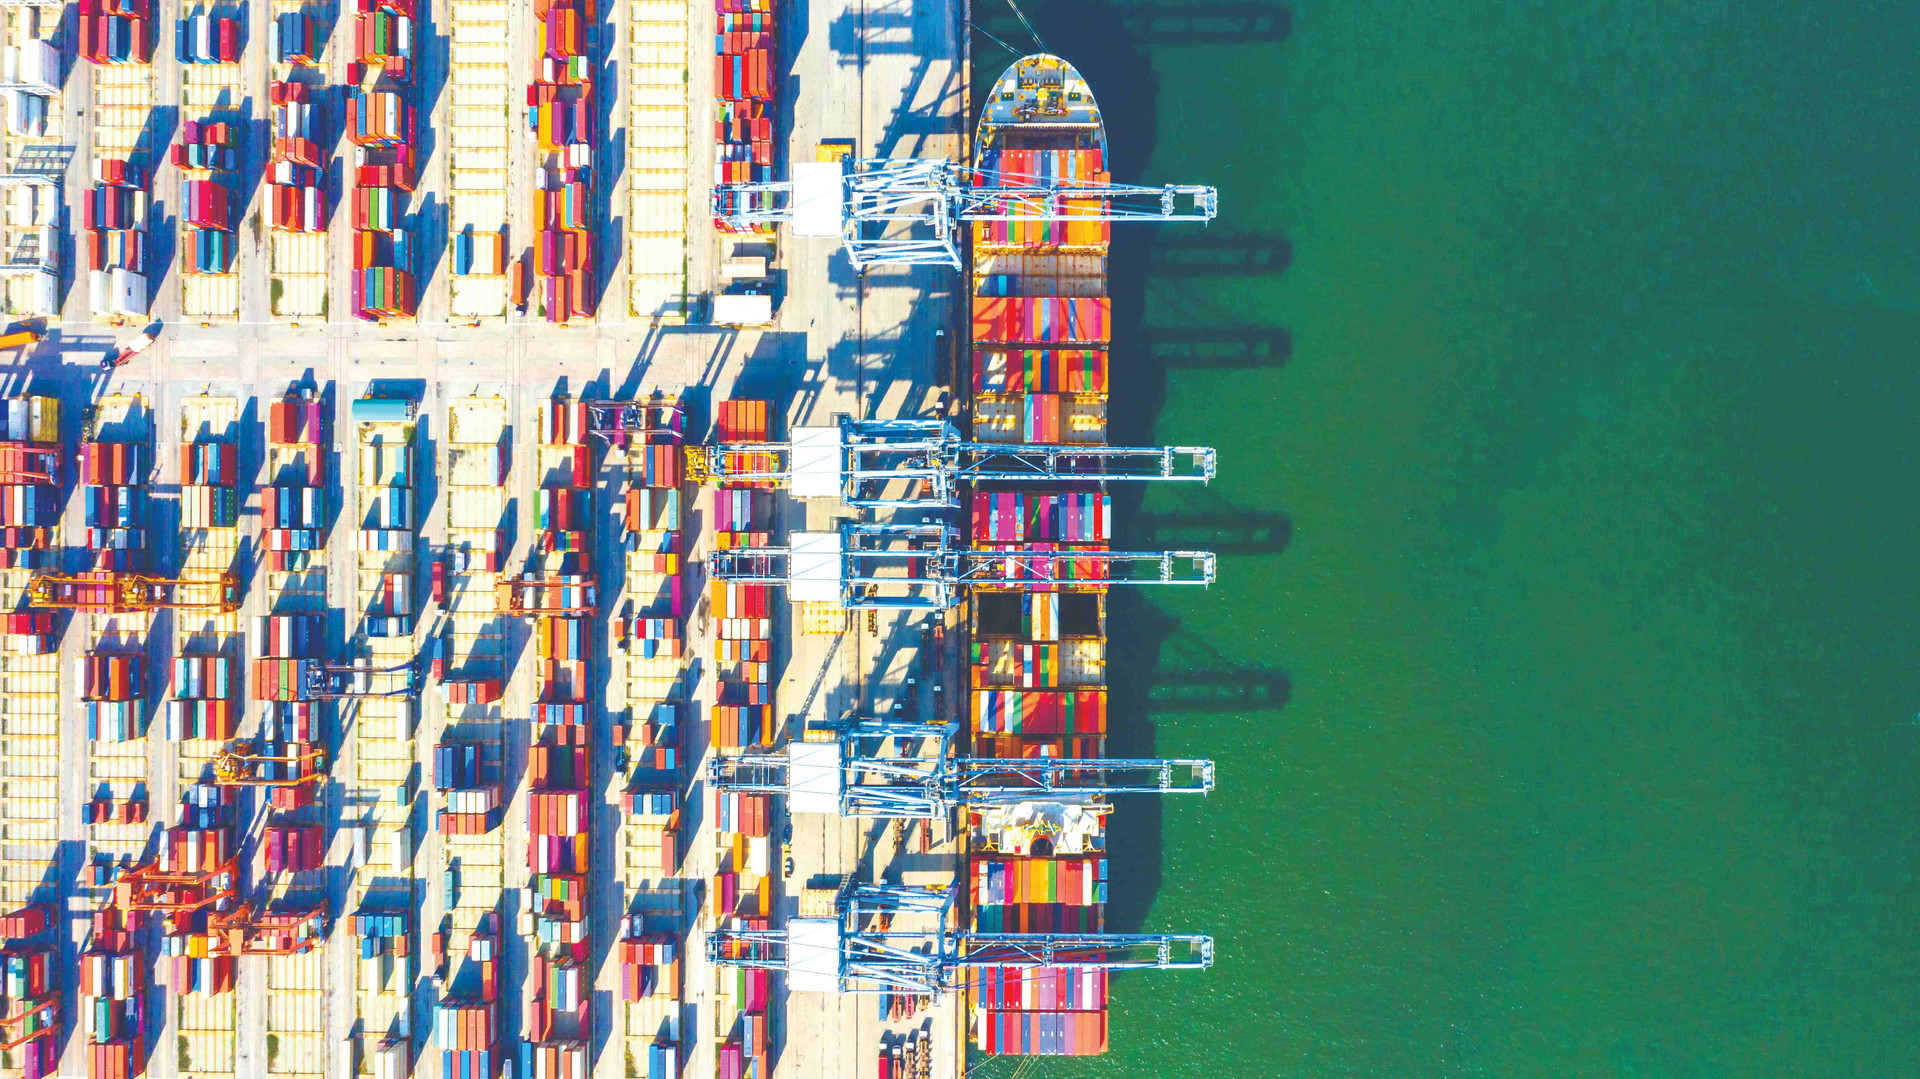 container-ship-loading-unloading-deep-sea-port-aerial-top-view-business-logistic-import-export-freight-transportation-compressed(1).jpg